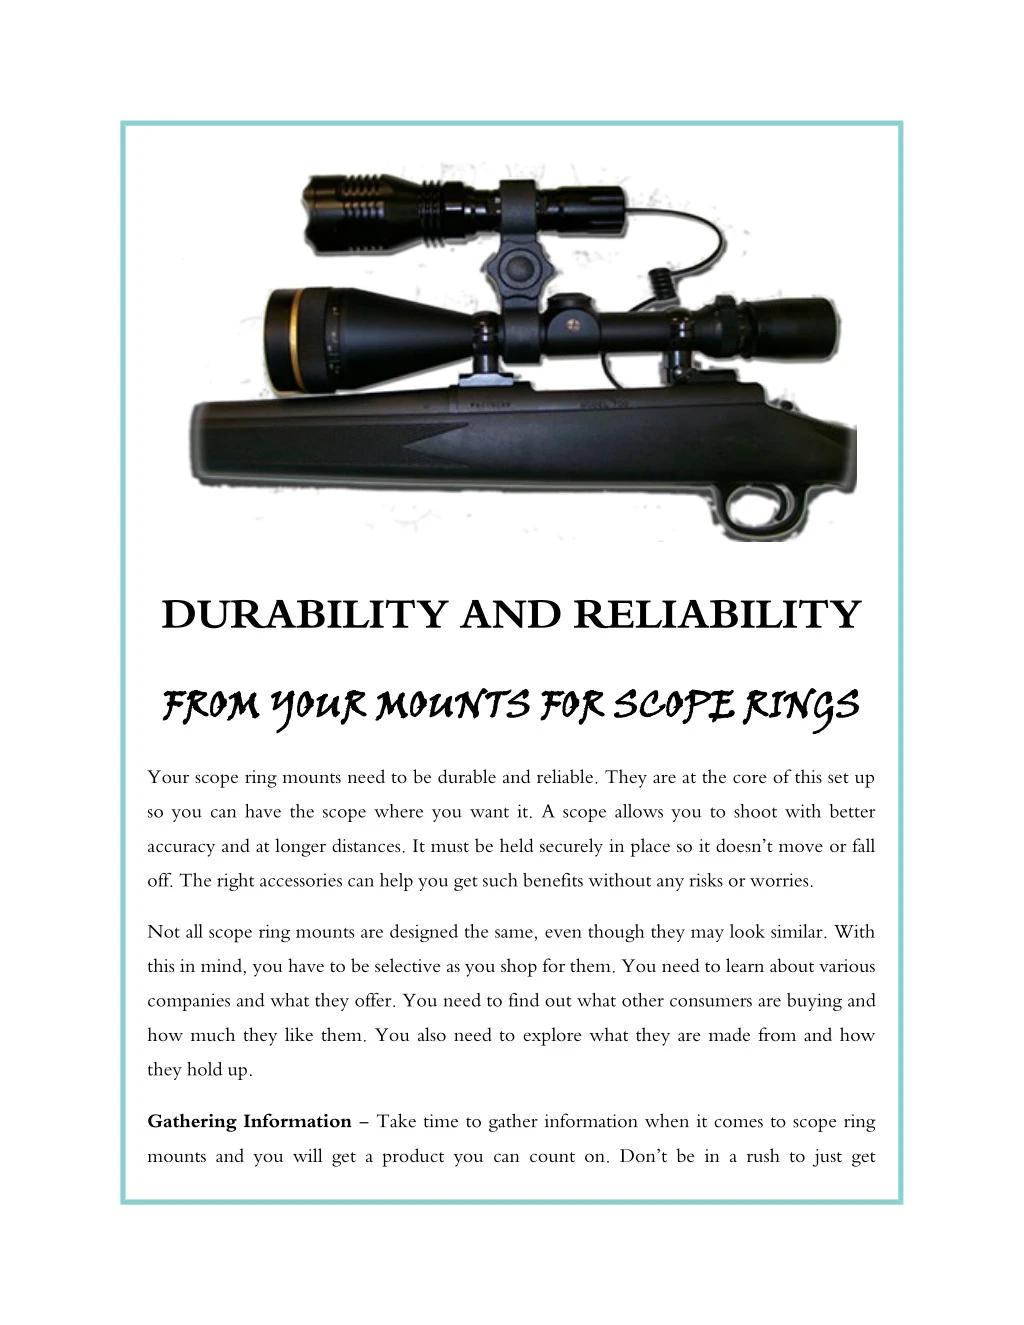 durability and reliability